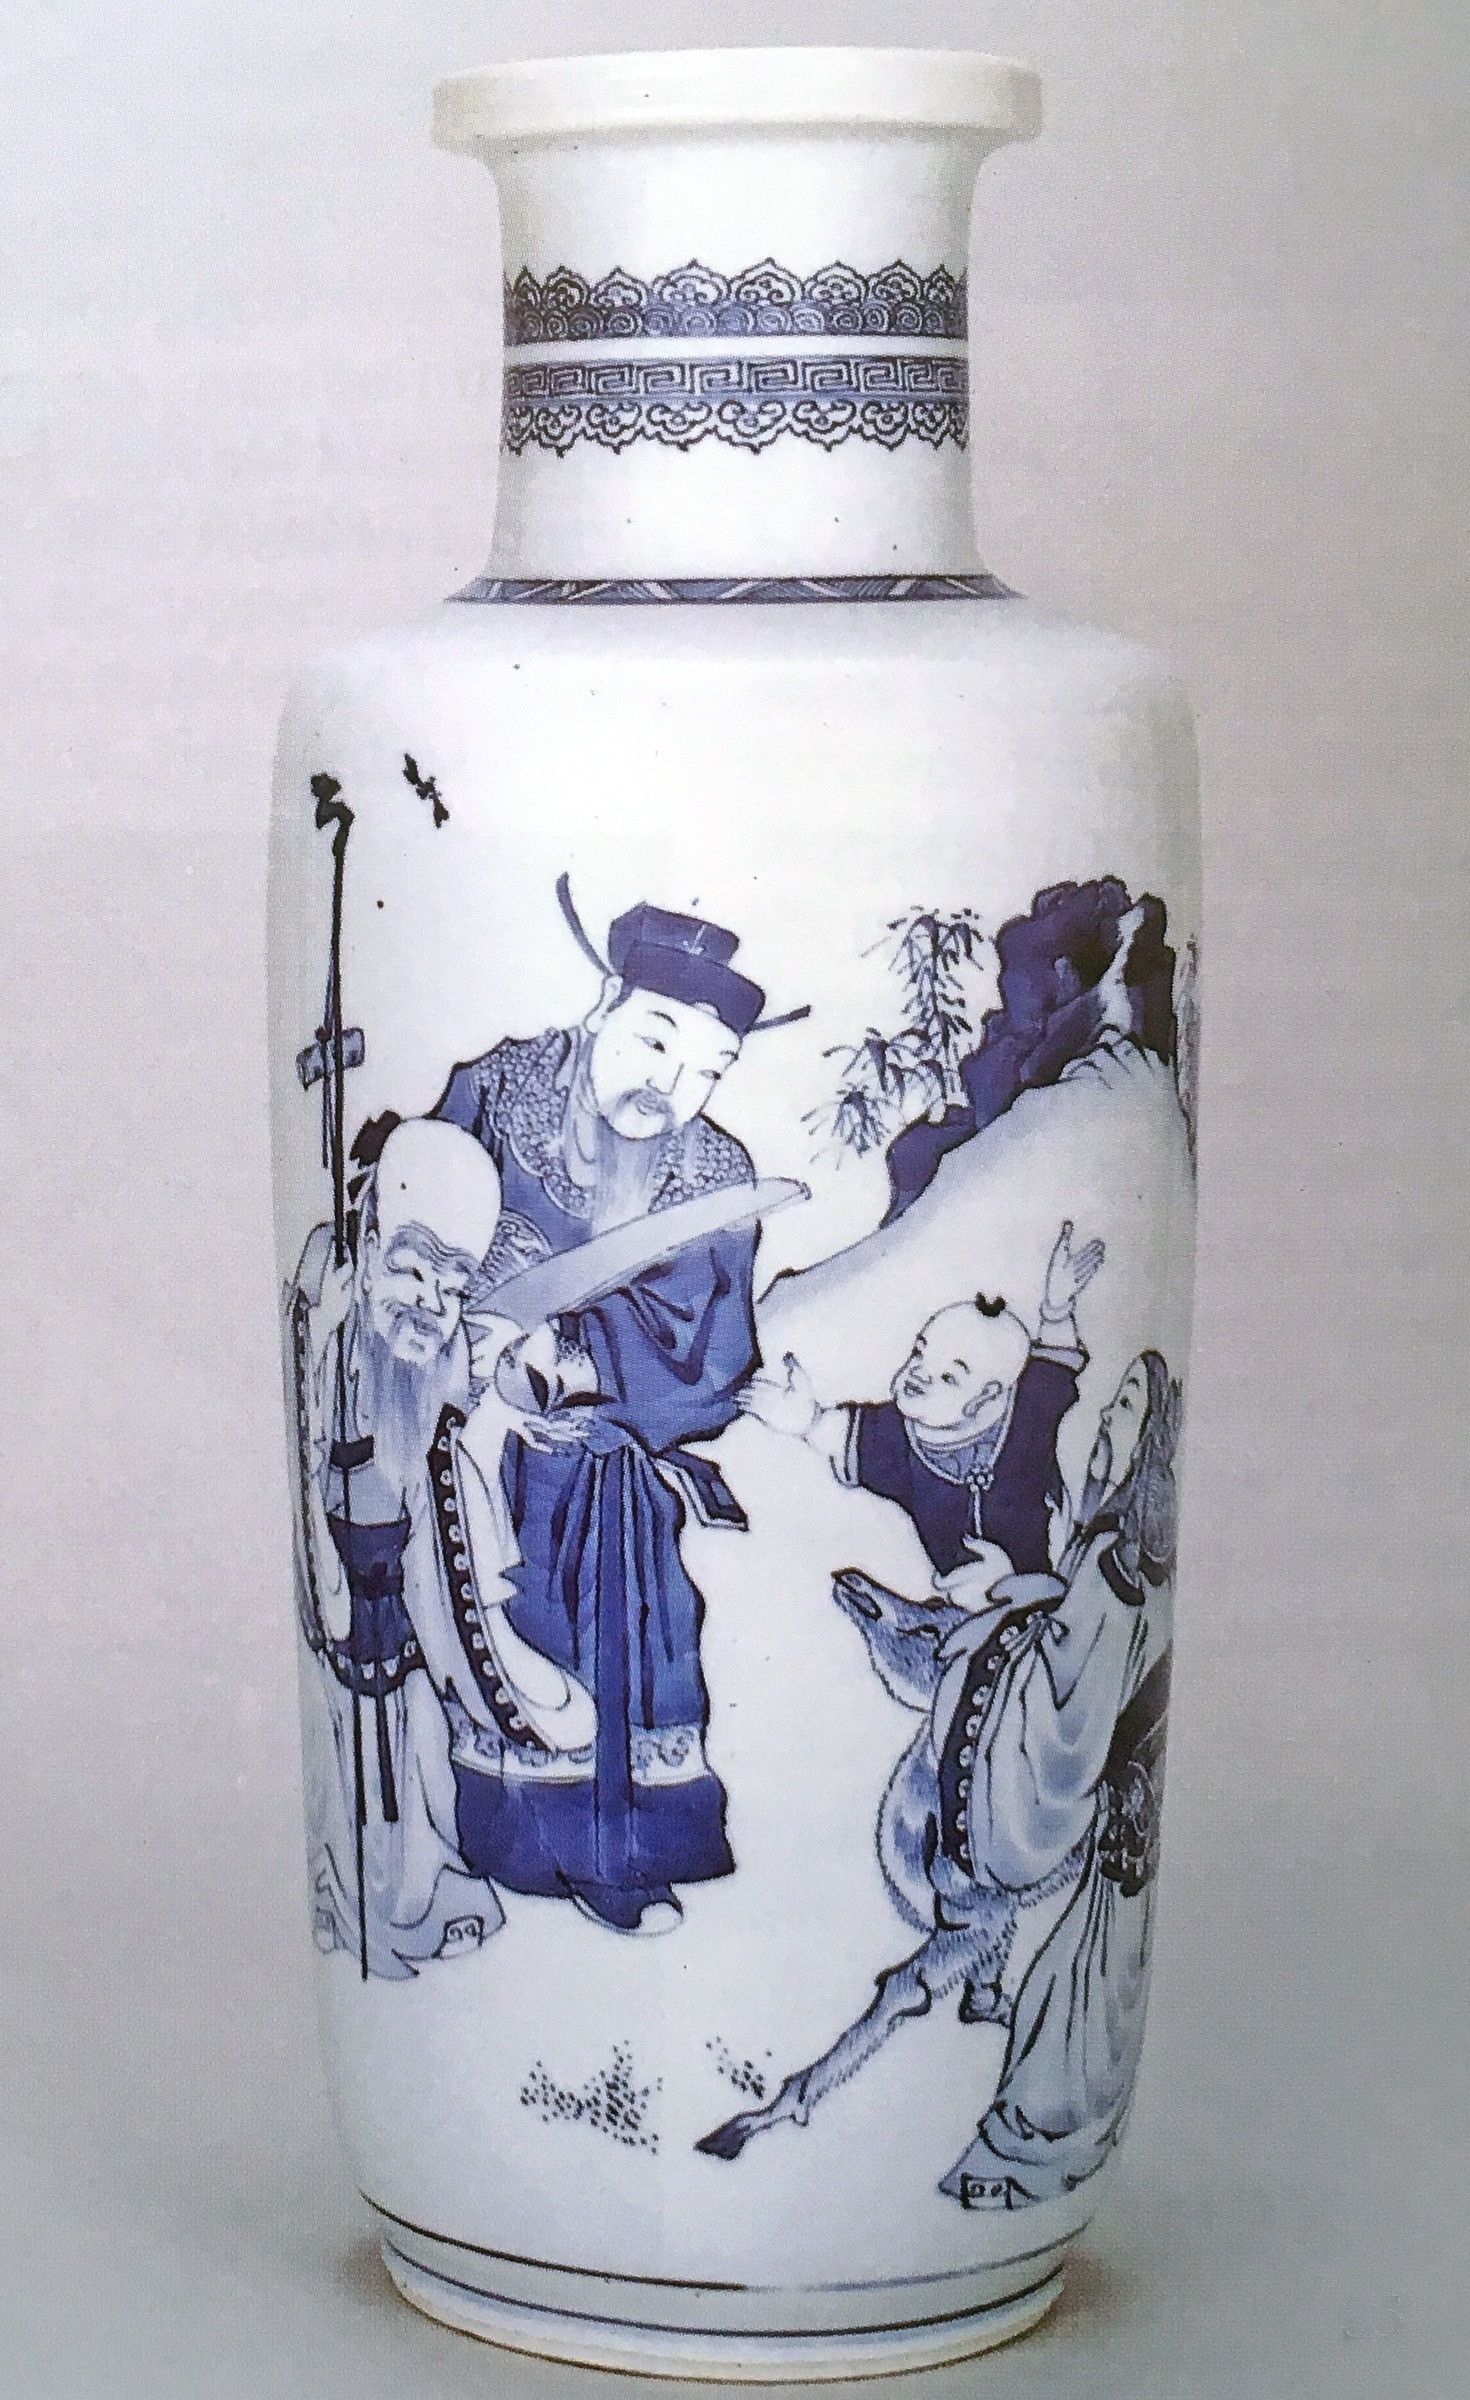 26 Lovable Tall Thin Blue Vase 2024 free download tall thin blue vase of a blue and white rouleau vase kangxi 1662 1722 anita gray with a blue and white rouleau vase